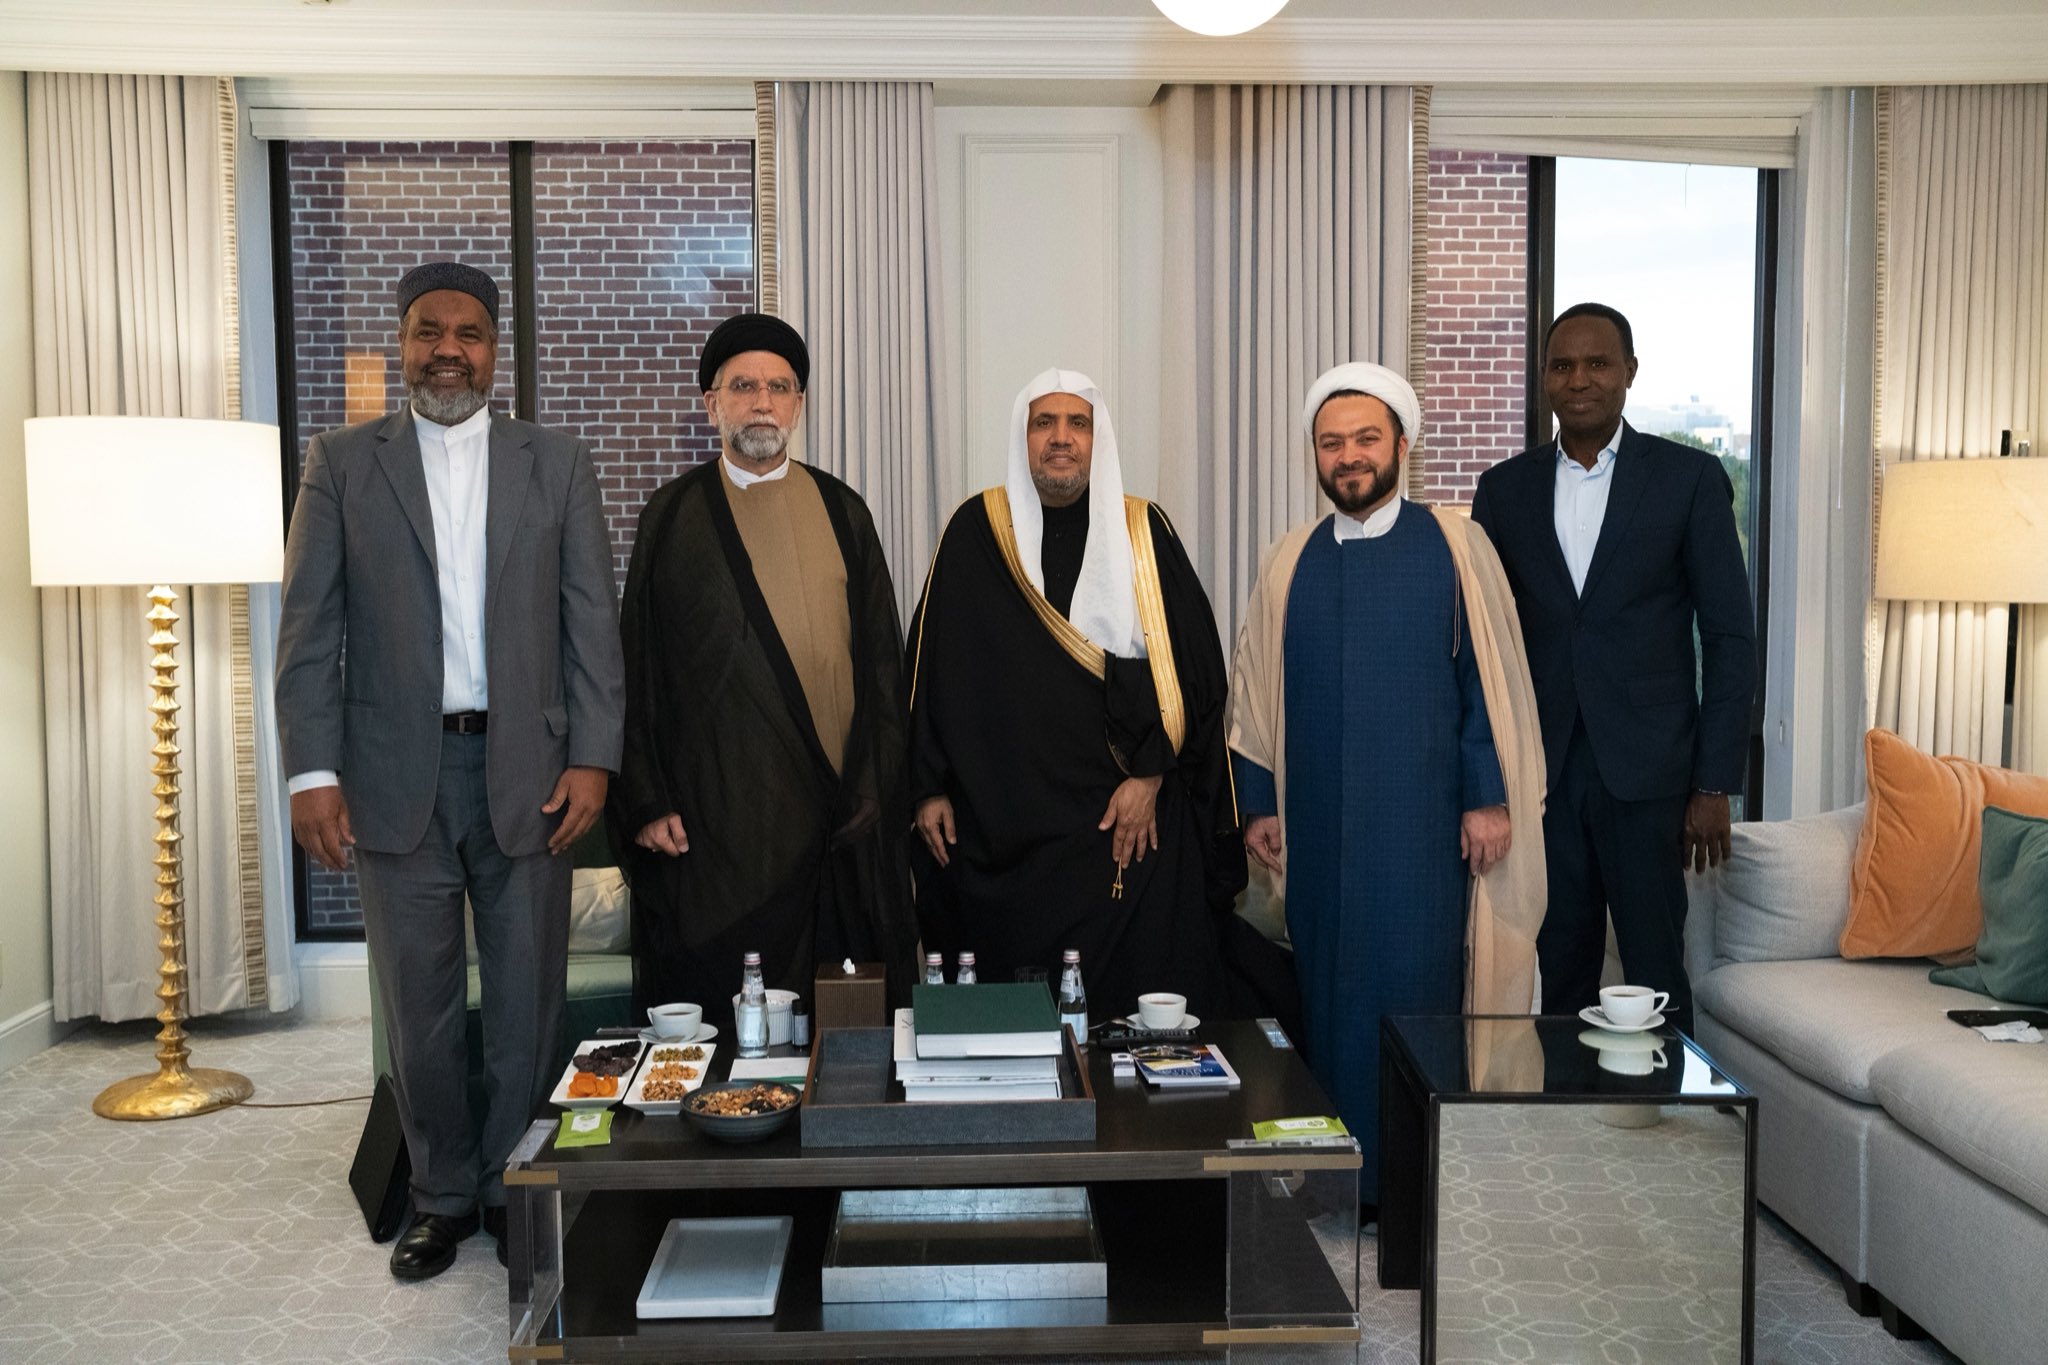 His Excellency Dr. MohammadلاAlissa met with a group of Islamic leaders from around the United States